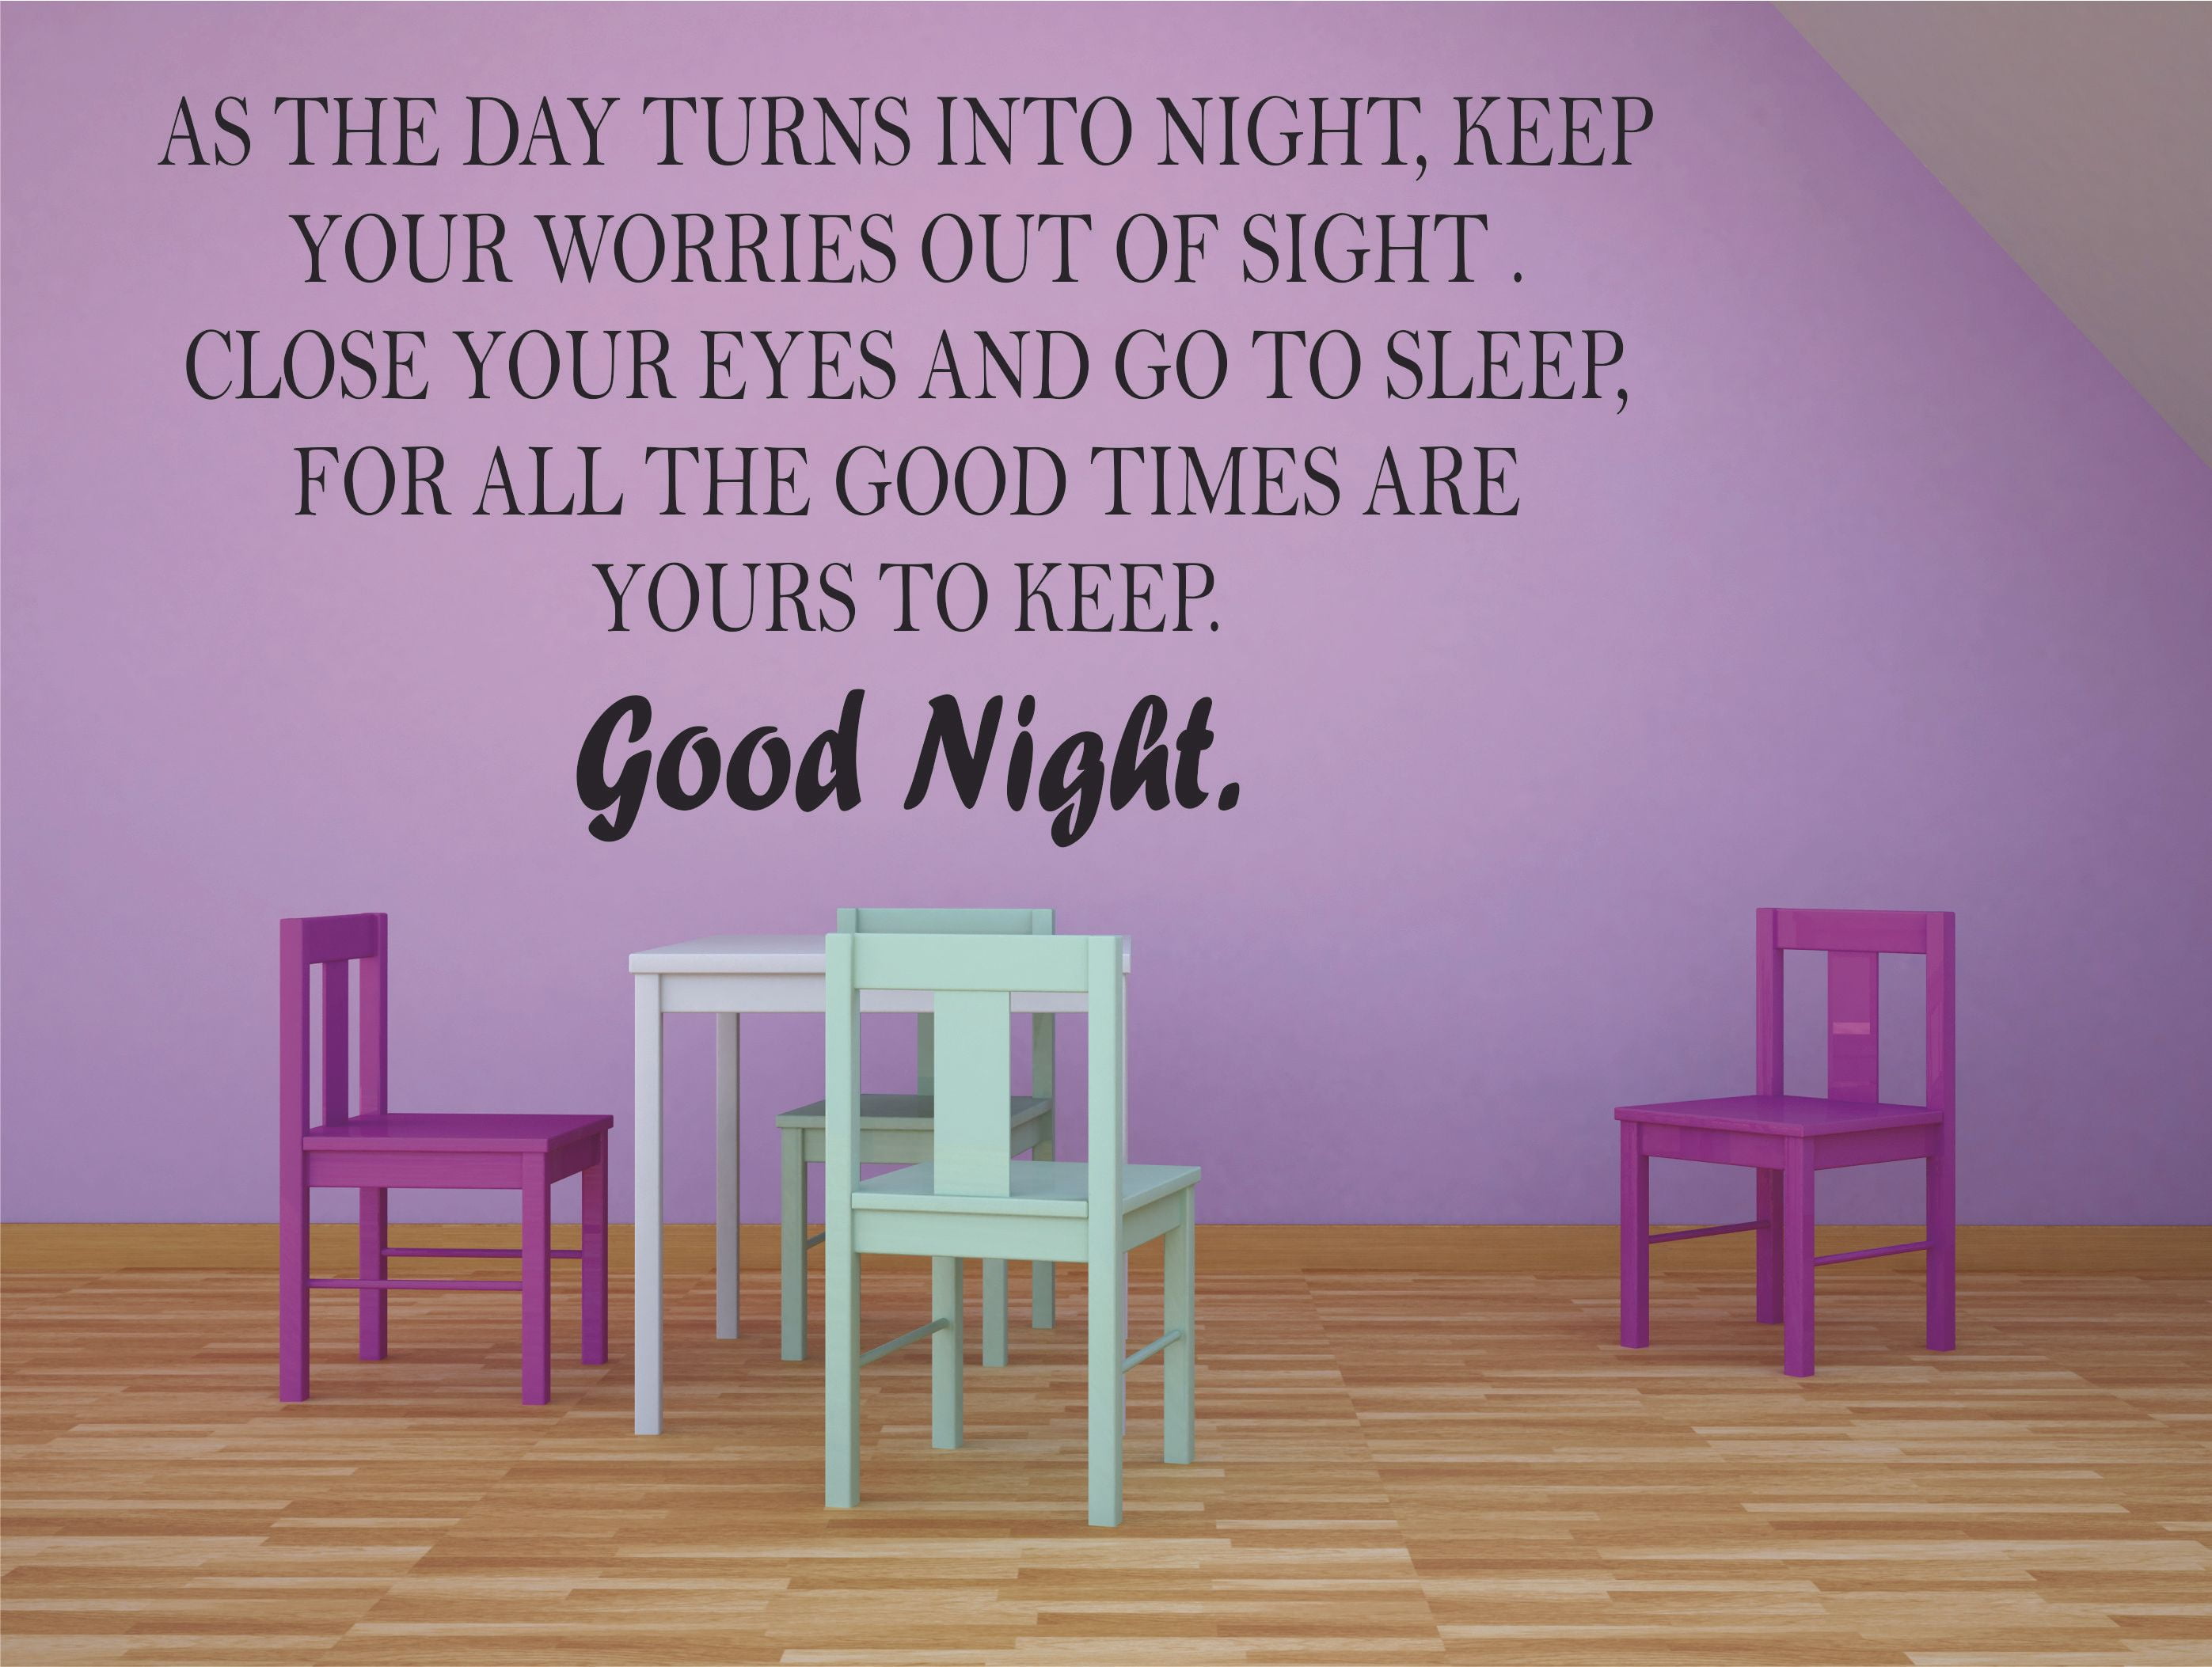 Good Night Quotes Sleep Quote Sleeping Poem Rhymes Saying Wall Decal ...